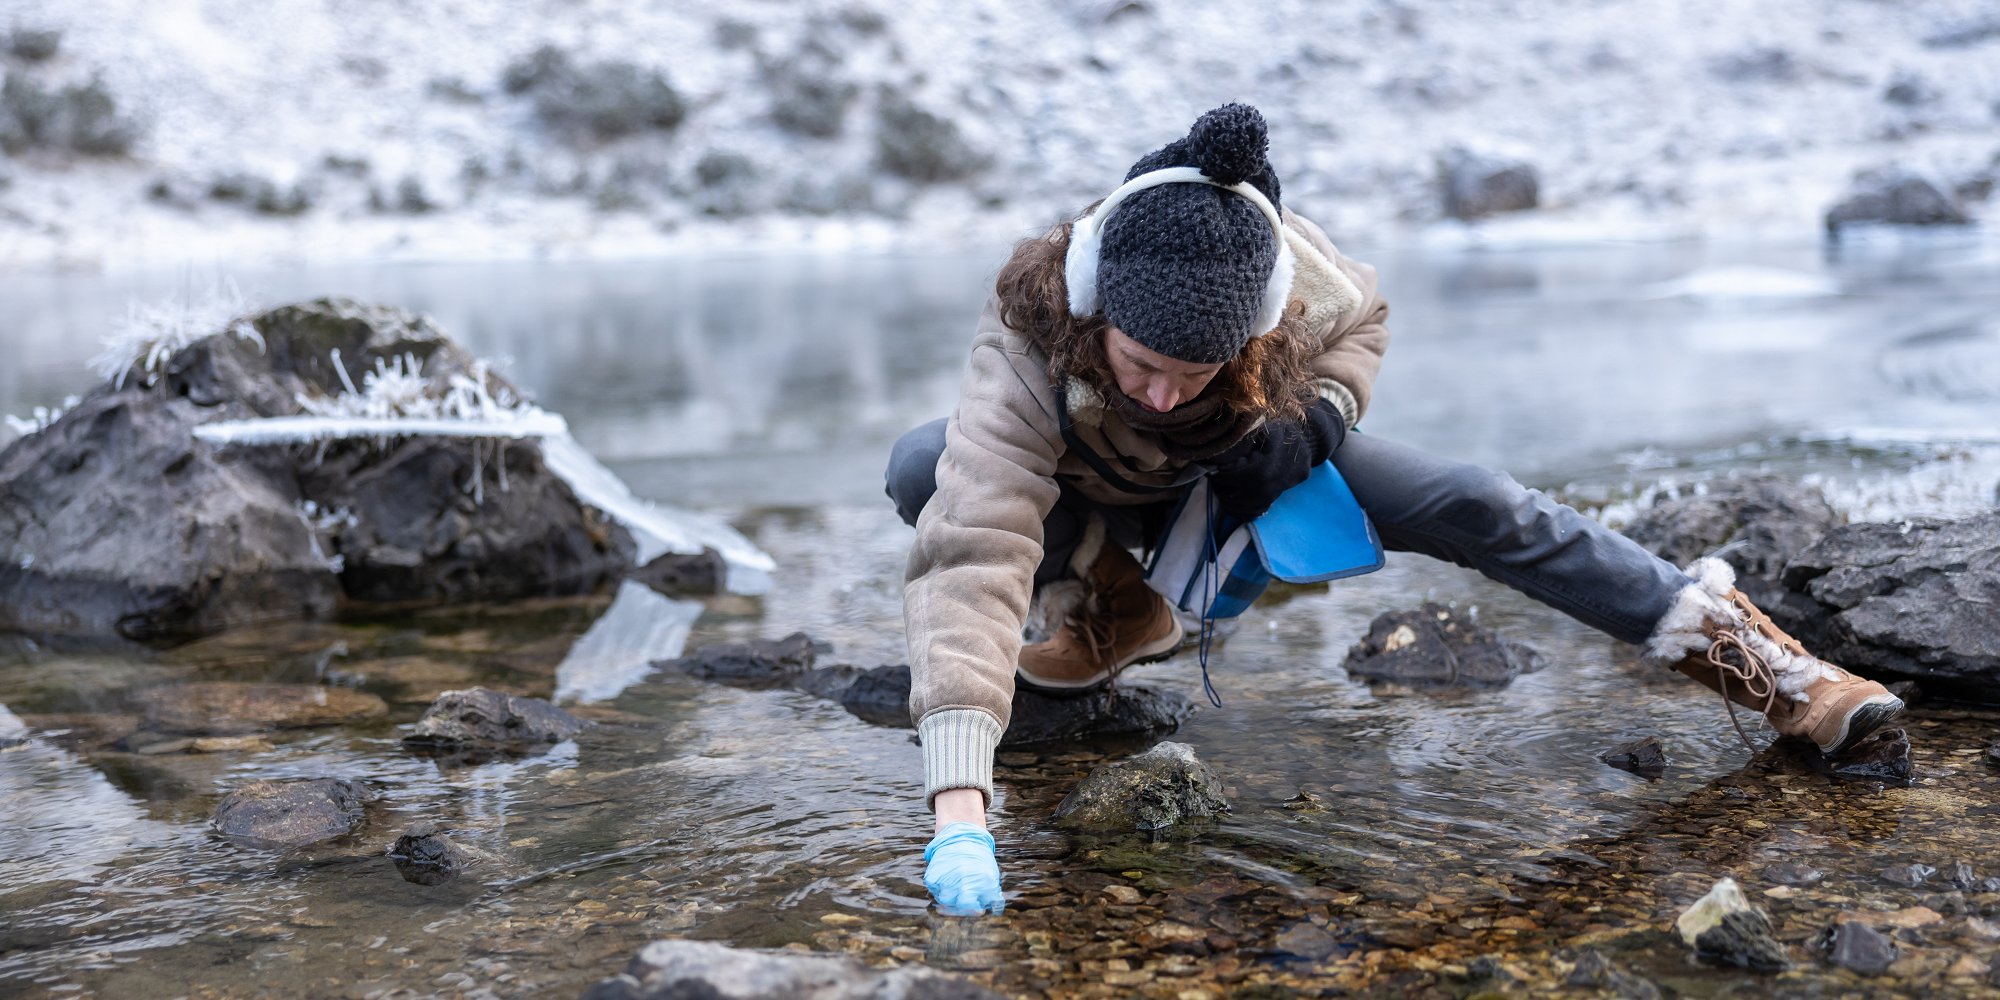 Woman Biologist Collecting Environment Samples from a Mountain Lake in Winter